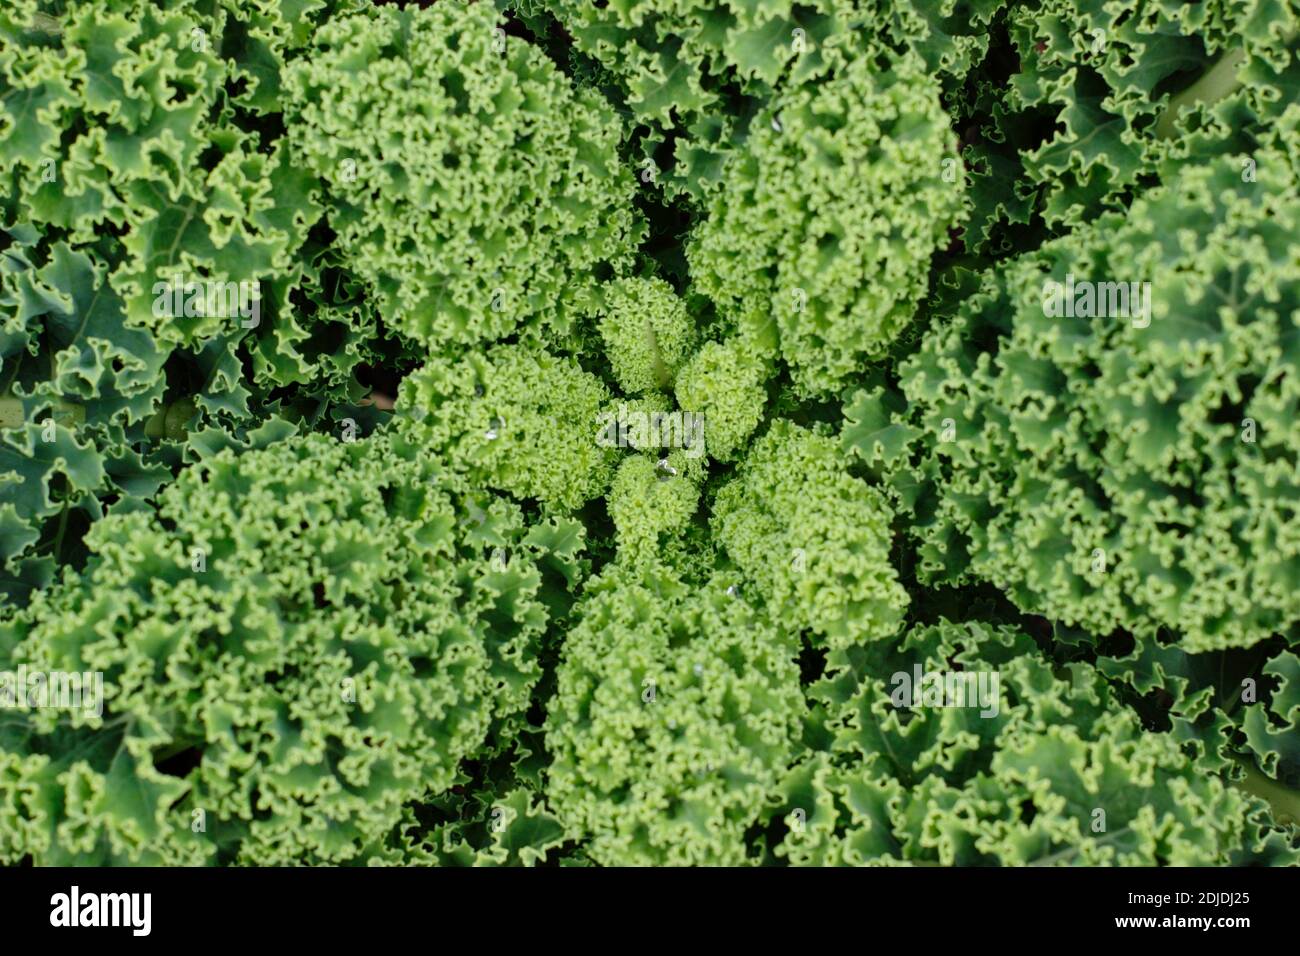 Homegrown curly kale plant growing in a small vegetable plot in a domestic garden. UK. Brassica oleracea Acephala group Stock Photo